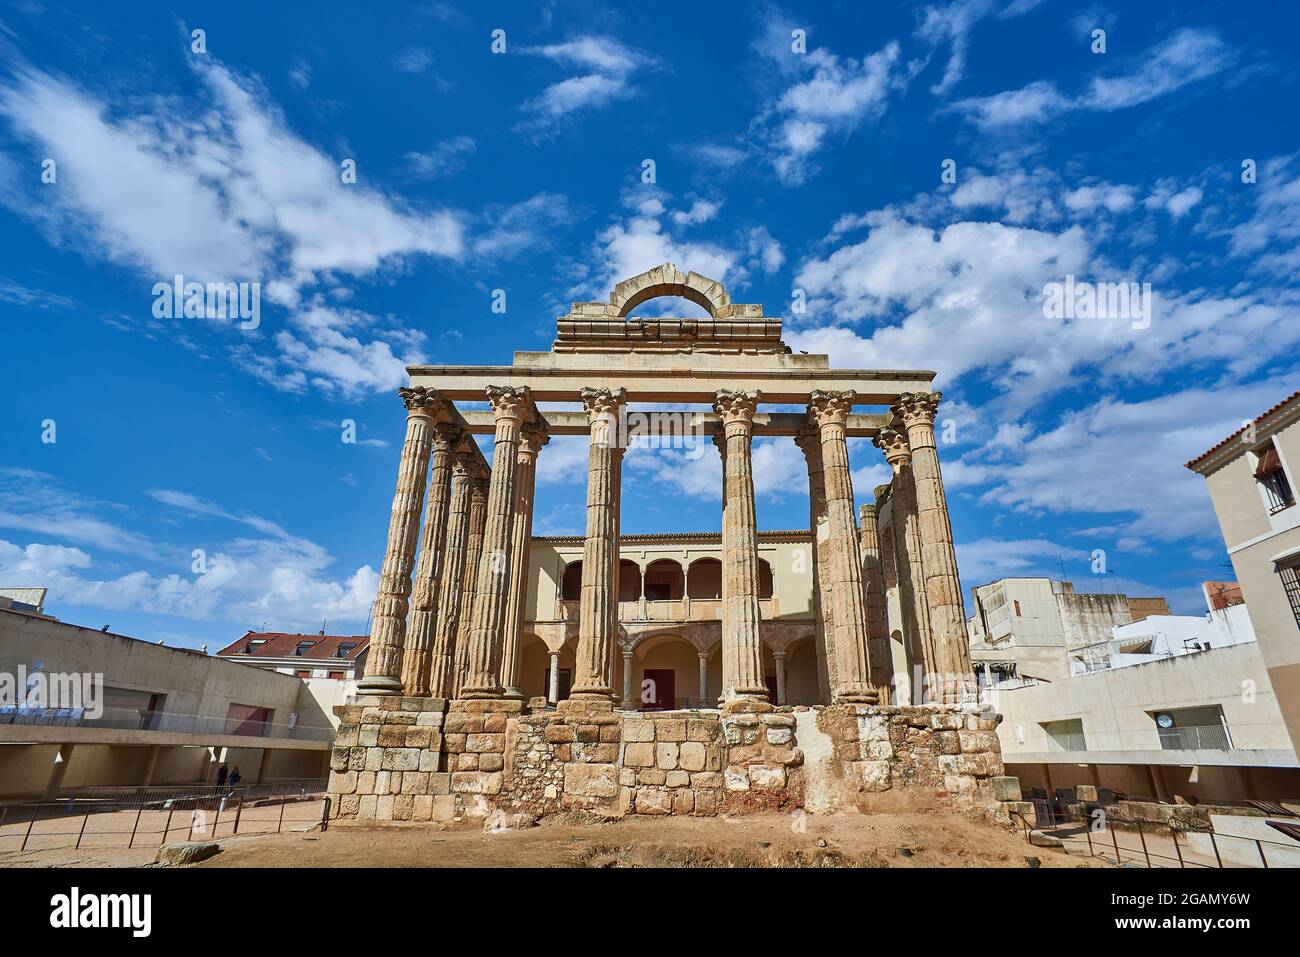 Archaeological remains of the Roman temple of Diana. Downtown of Merida, province of Badajoz, Extremadura, Spain. Stock Photo